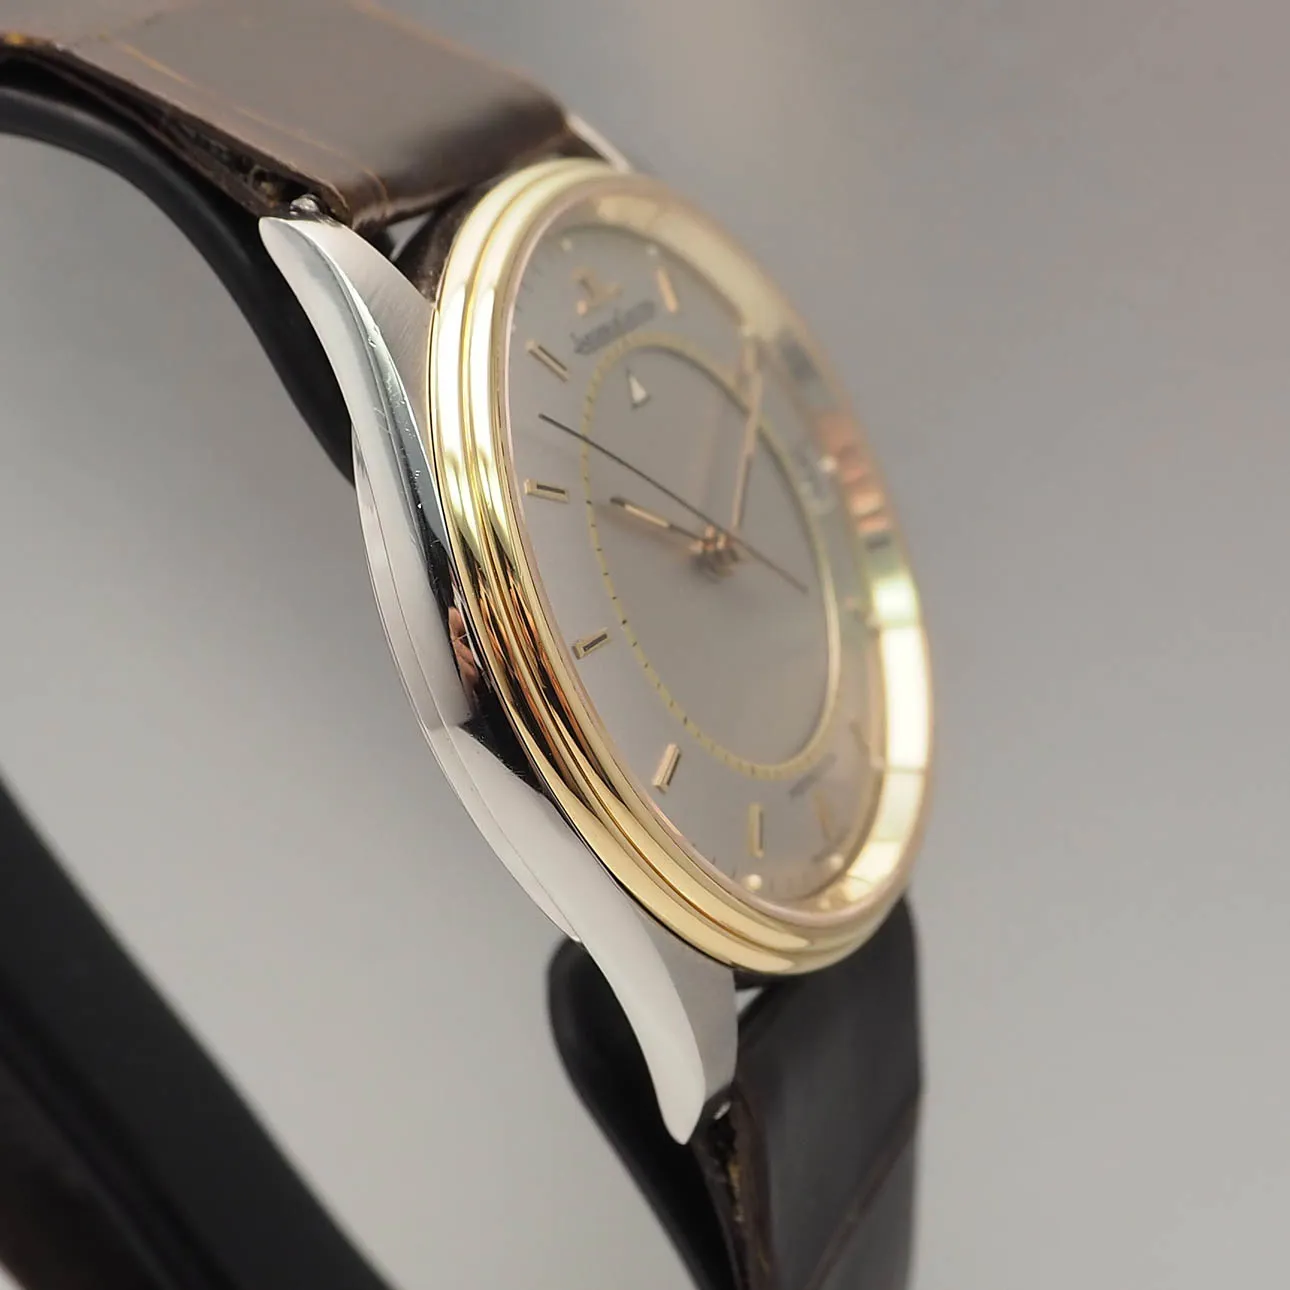 Jaeger-LeCoultre Memovox 141.012.5 36mm Yellow gold 1